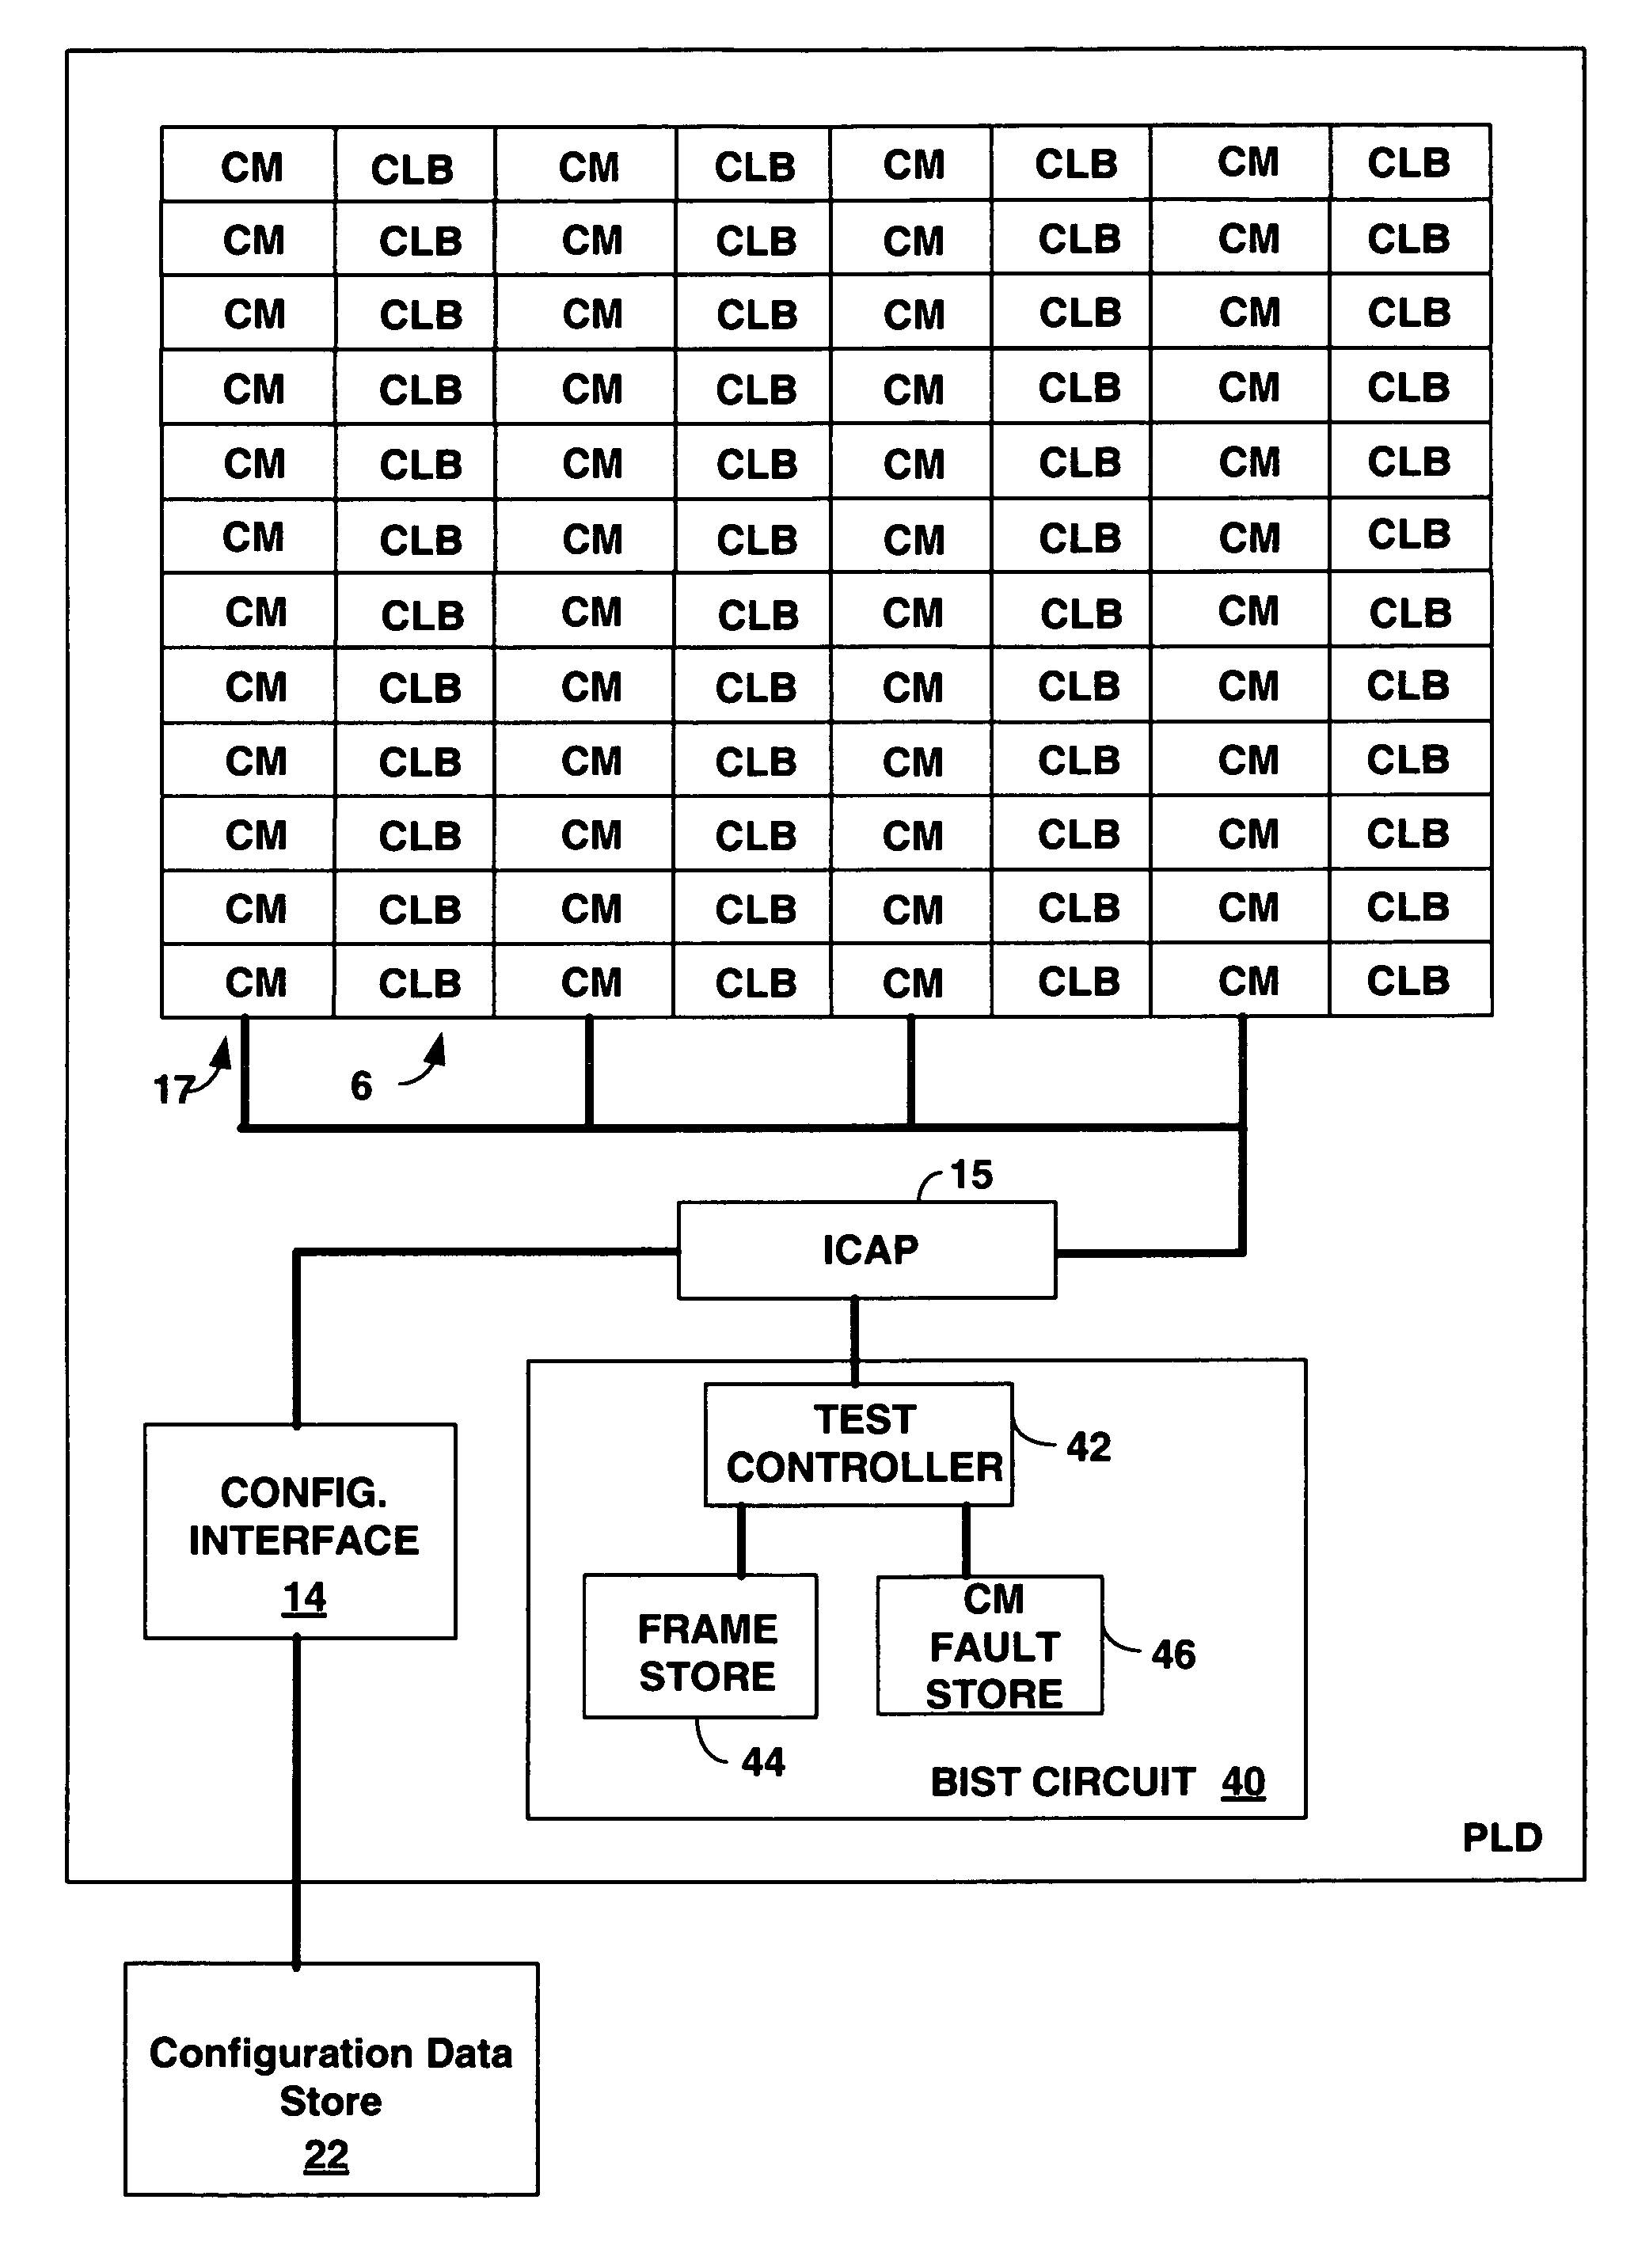 Total configuration memory cell validation built in self test (BIST) circuit